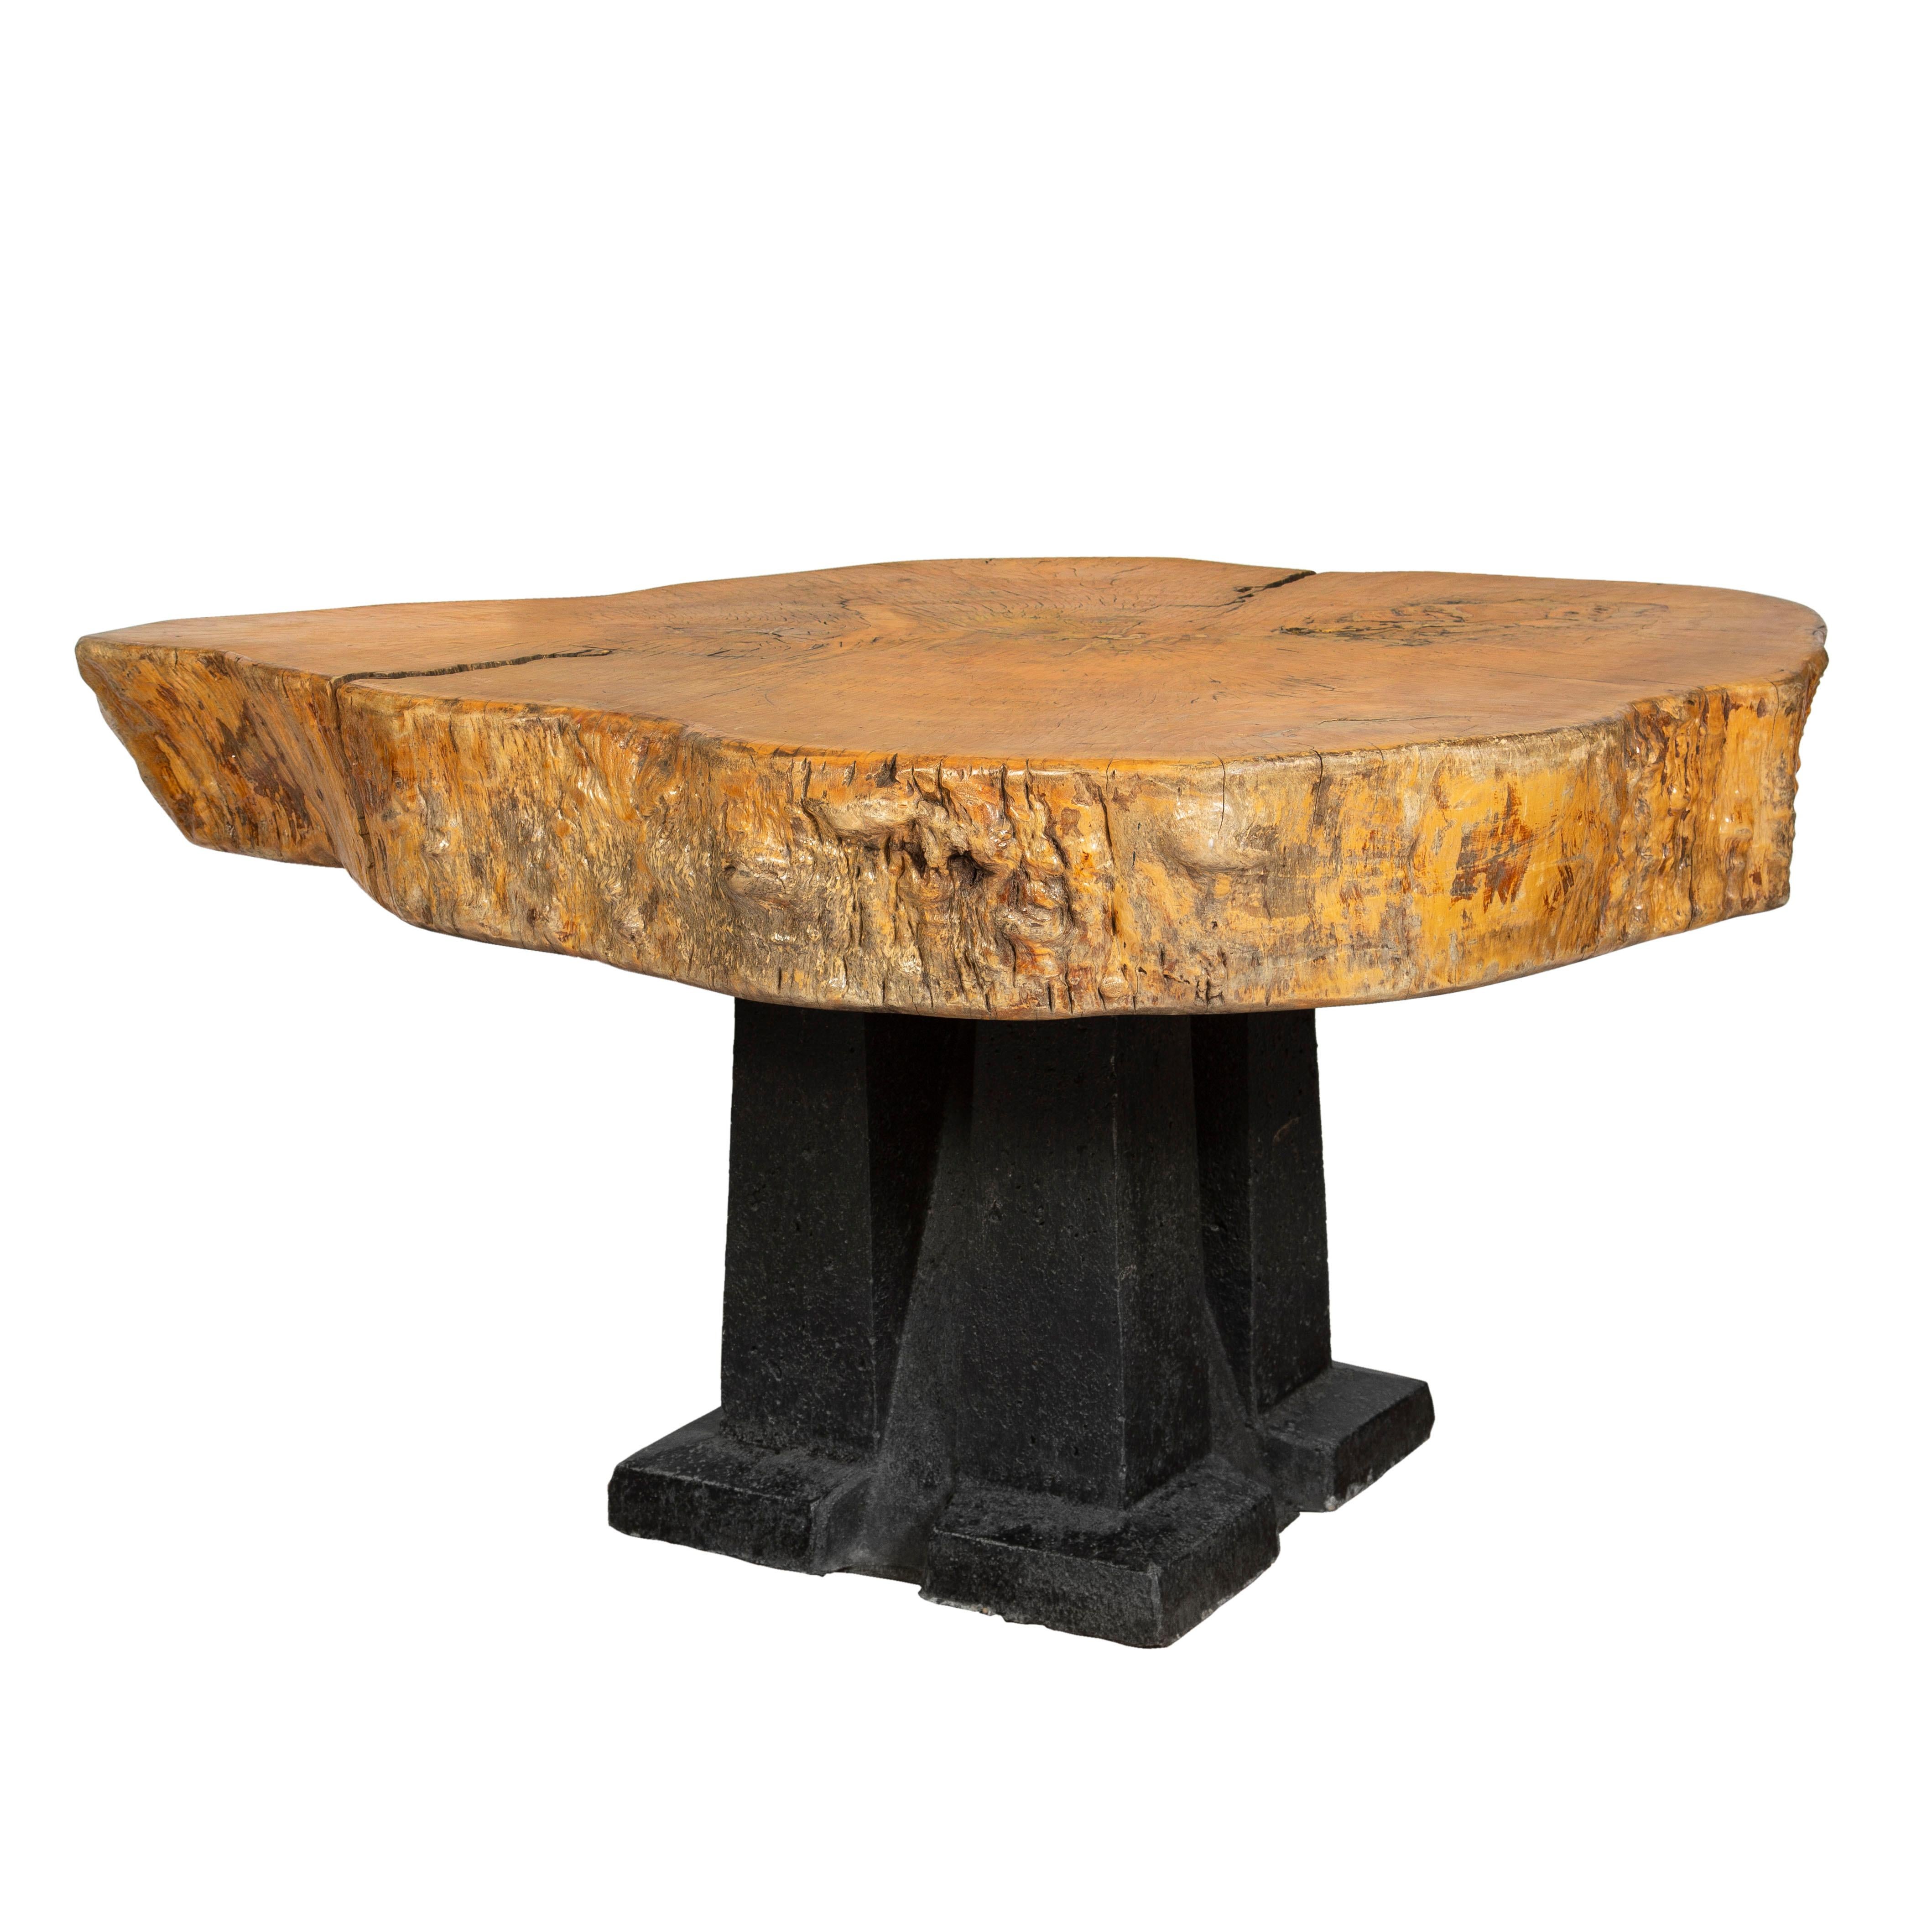 A pair of impressive thick oak slab tables with solid iron bases. Both were originally created in early 1970s for an architectural firm in Paris, France. The overall scale of the materials used makes them substantial and grand pieces of design and